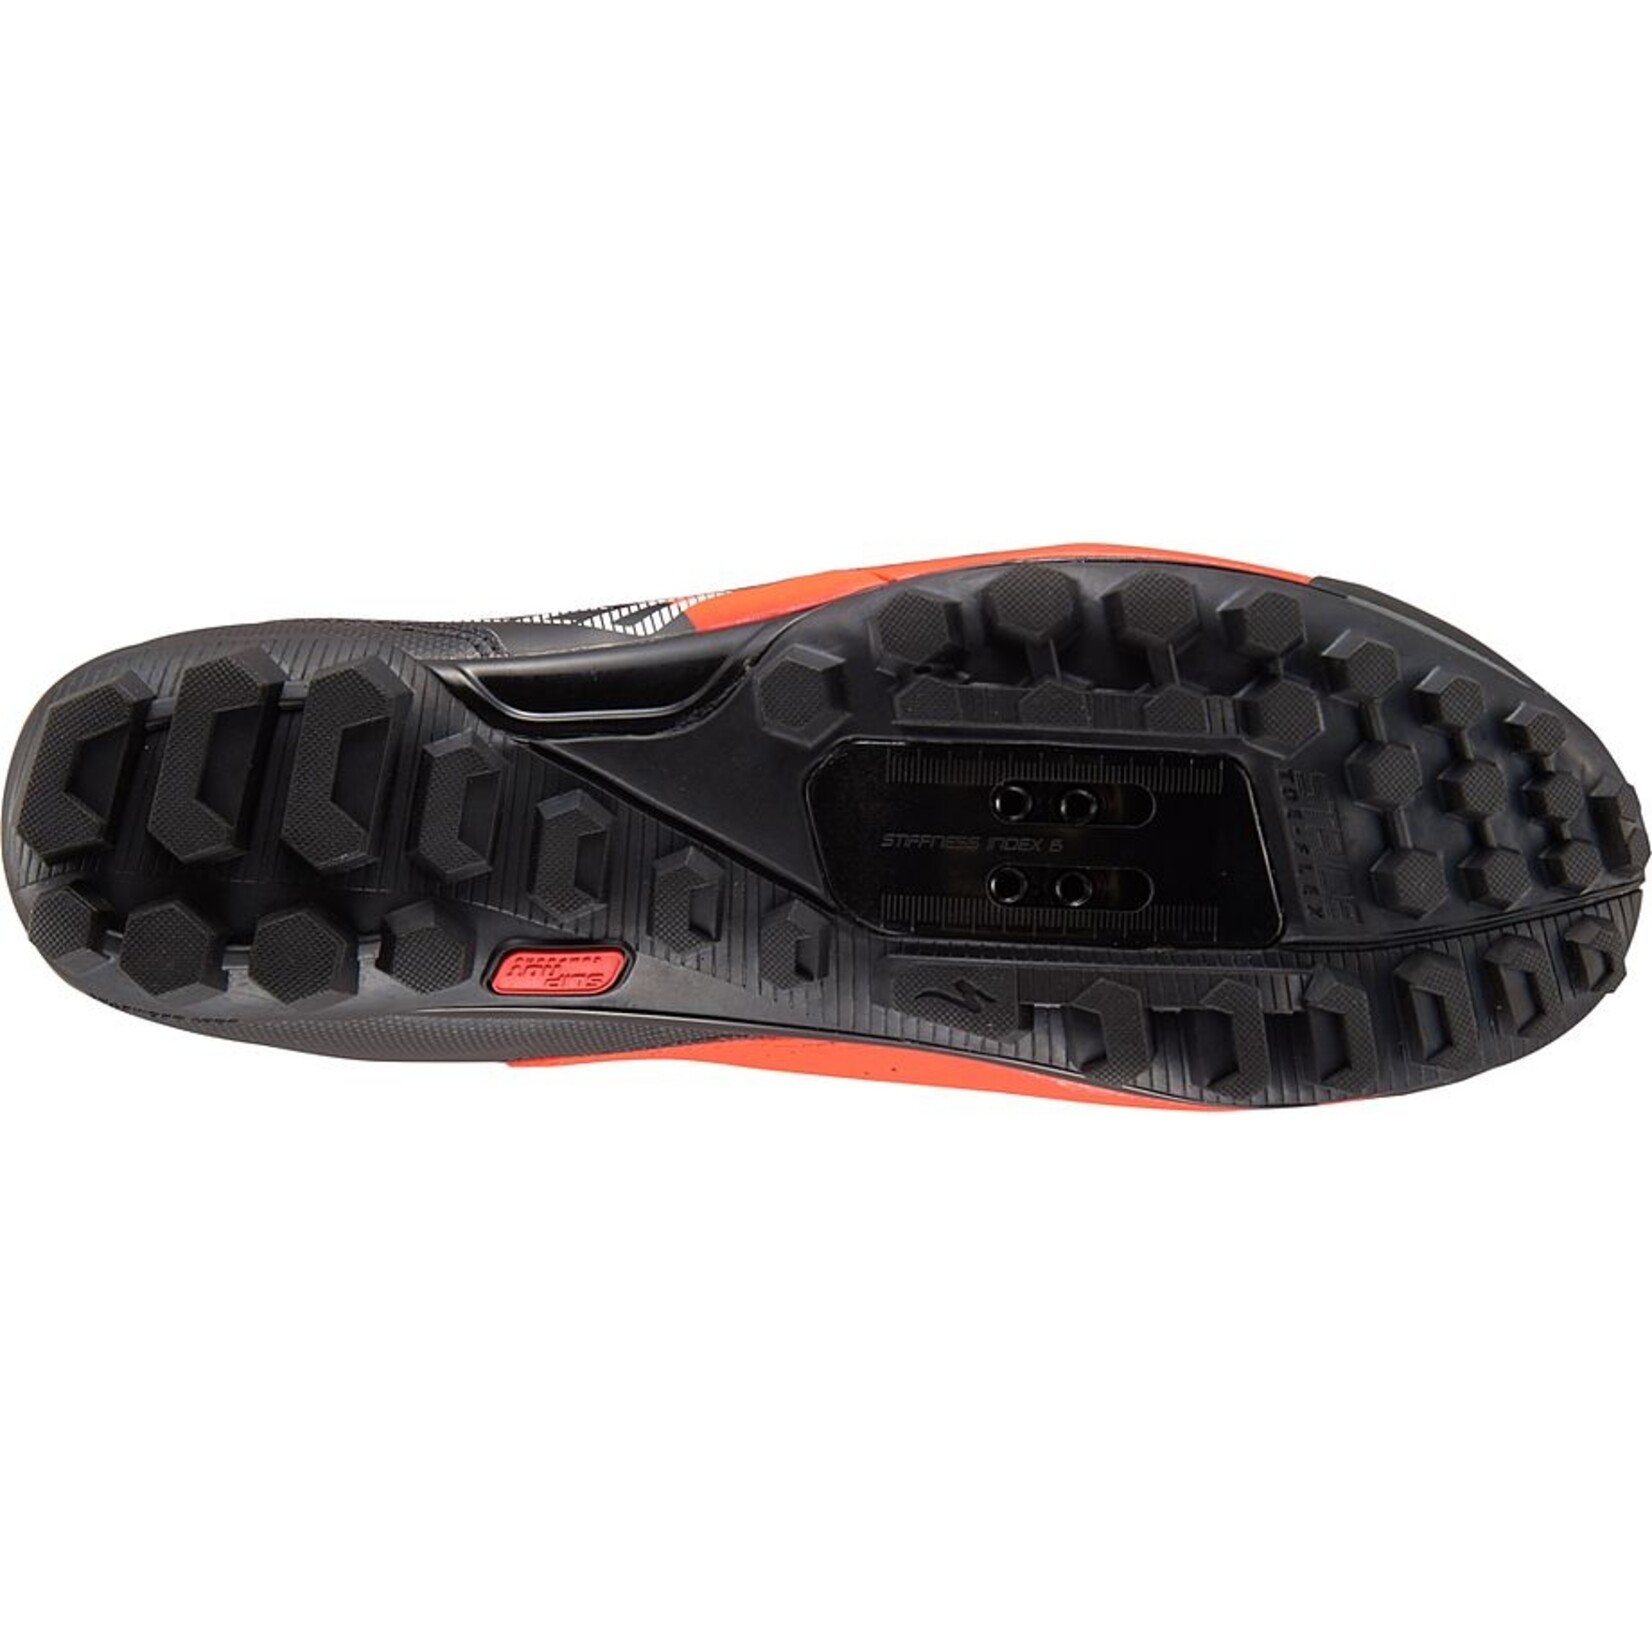 Specialized Recon 2.0 Mountain Bike Shoes in Rocket Red